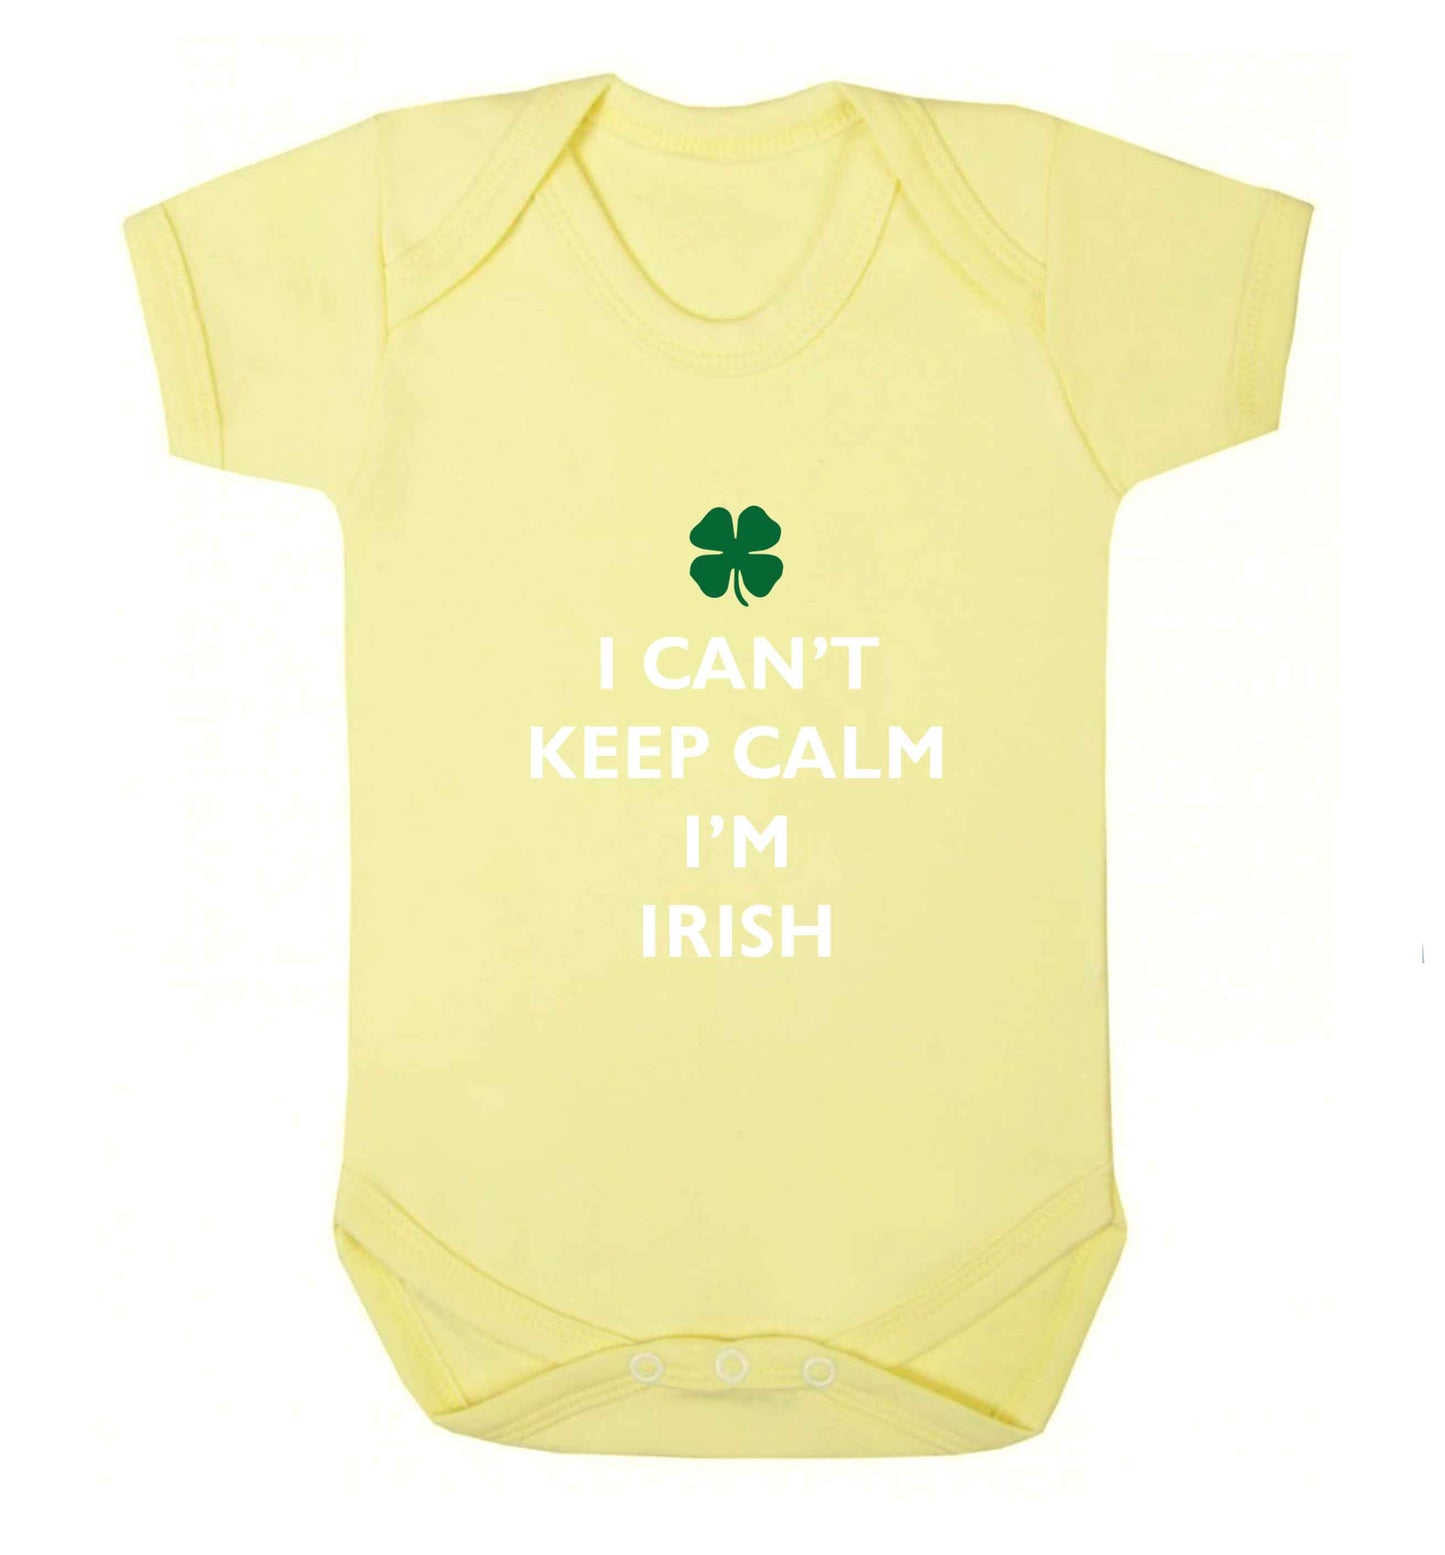 I can't keep calm I'm Irish baby vest pale yellow 18-24 months